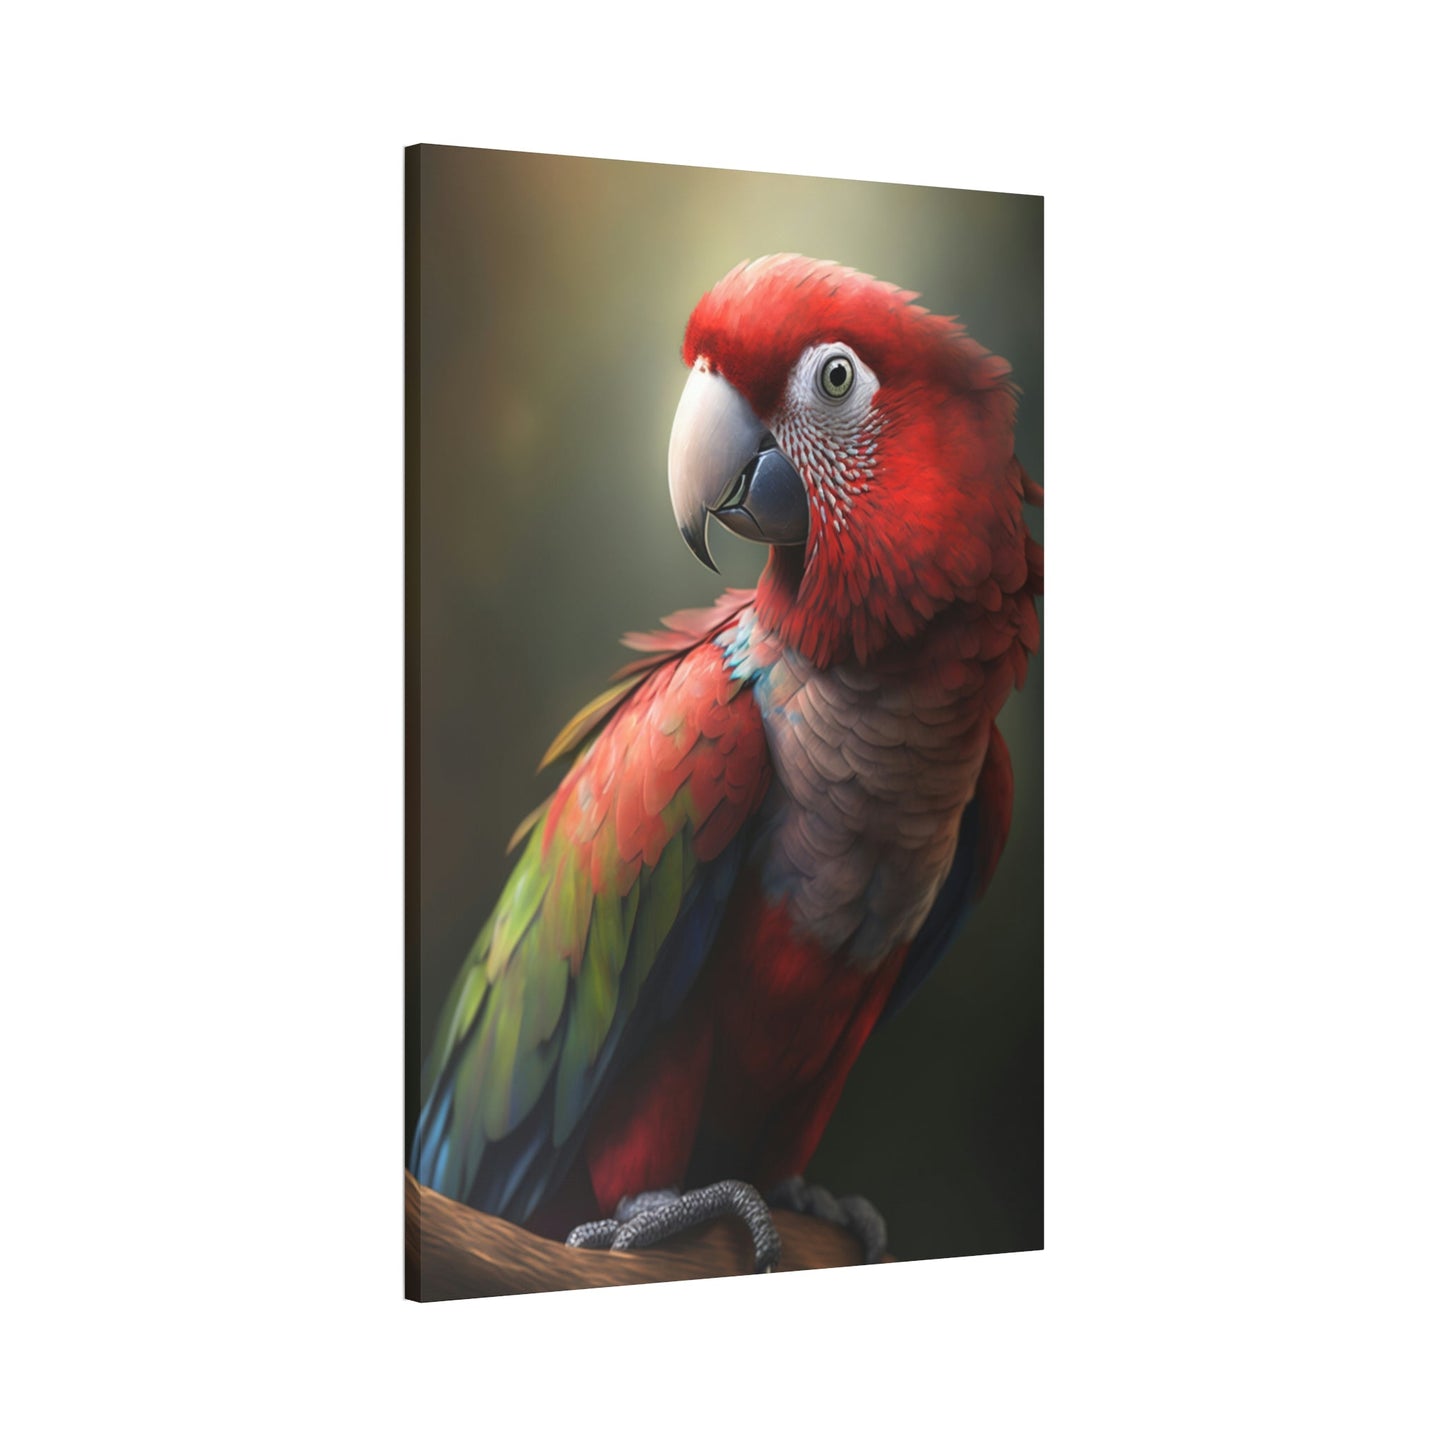 Feathered Frenzy: A Canvas of Parrot Energy and Enthusiasm